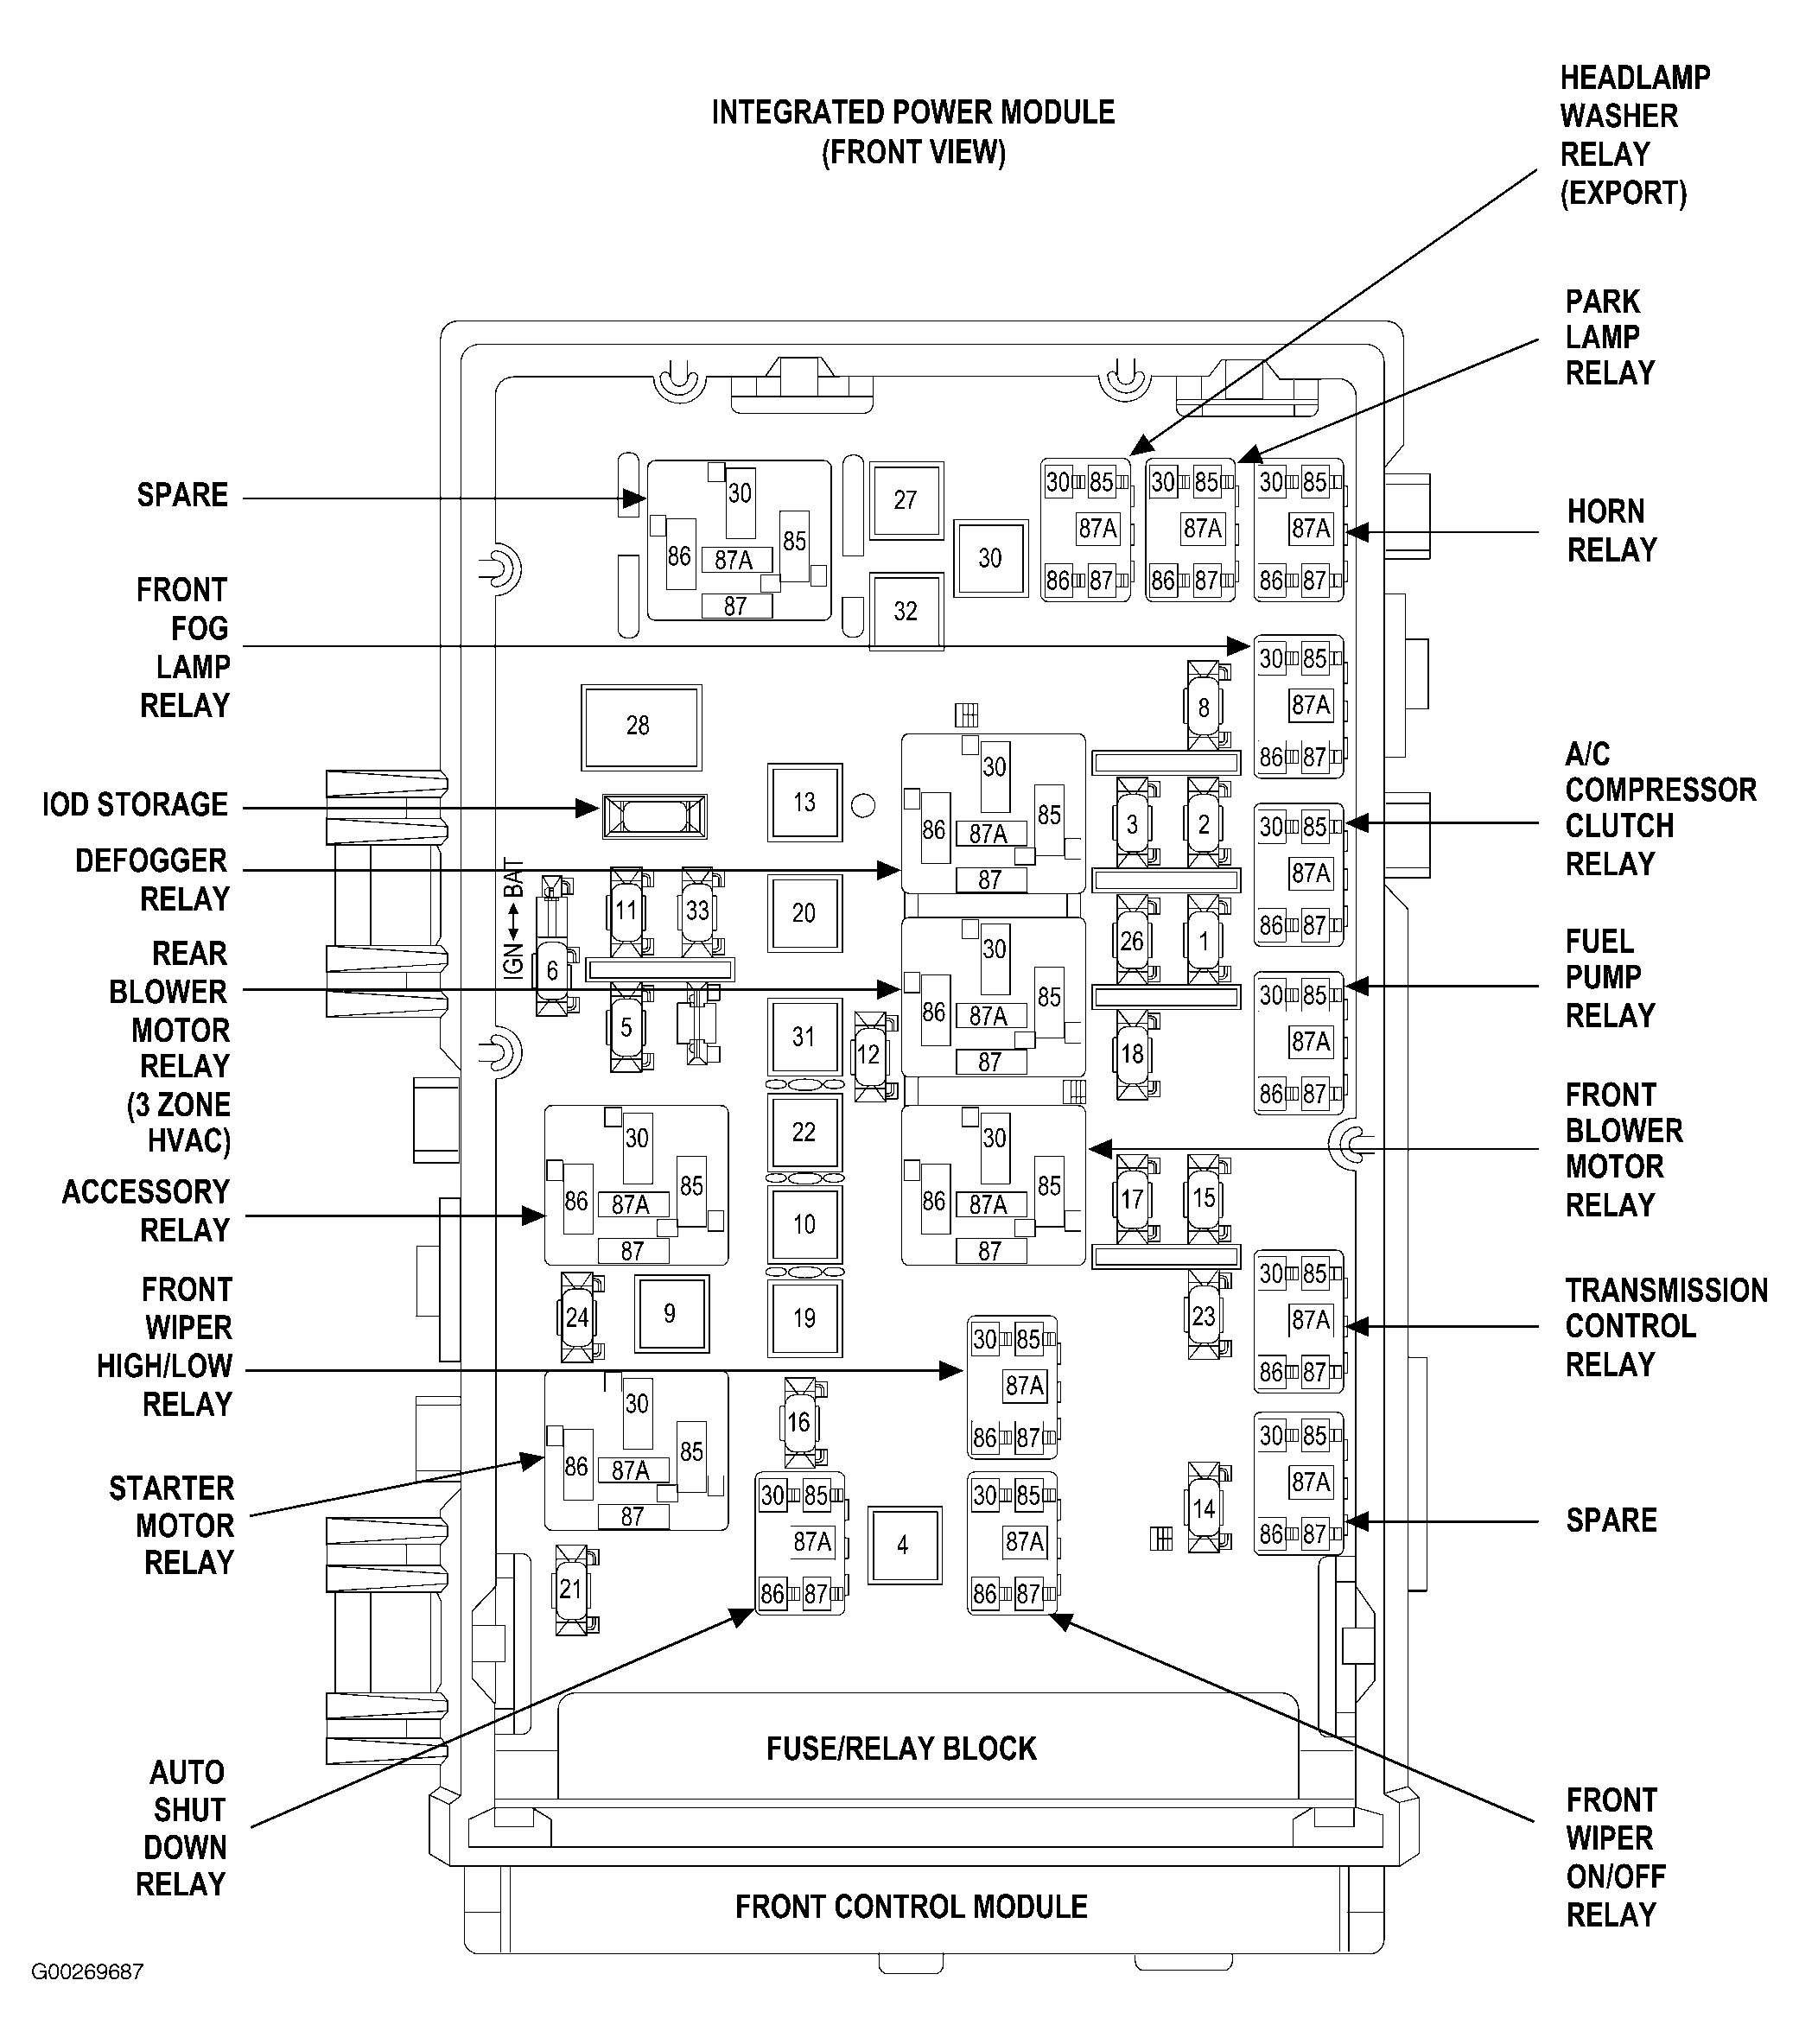 2005 Chrysler Town And Country Wiring Diagram Pdf from www.2carpros.com